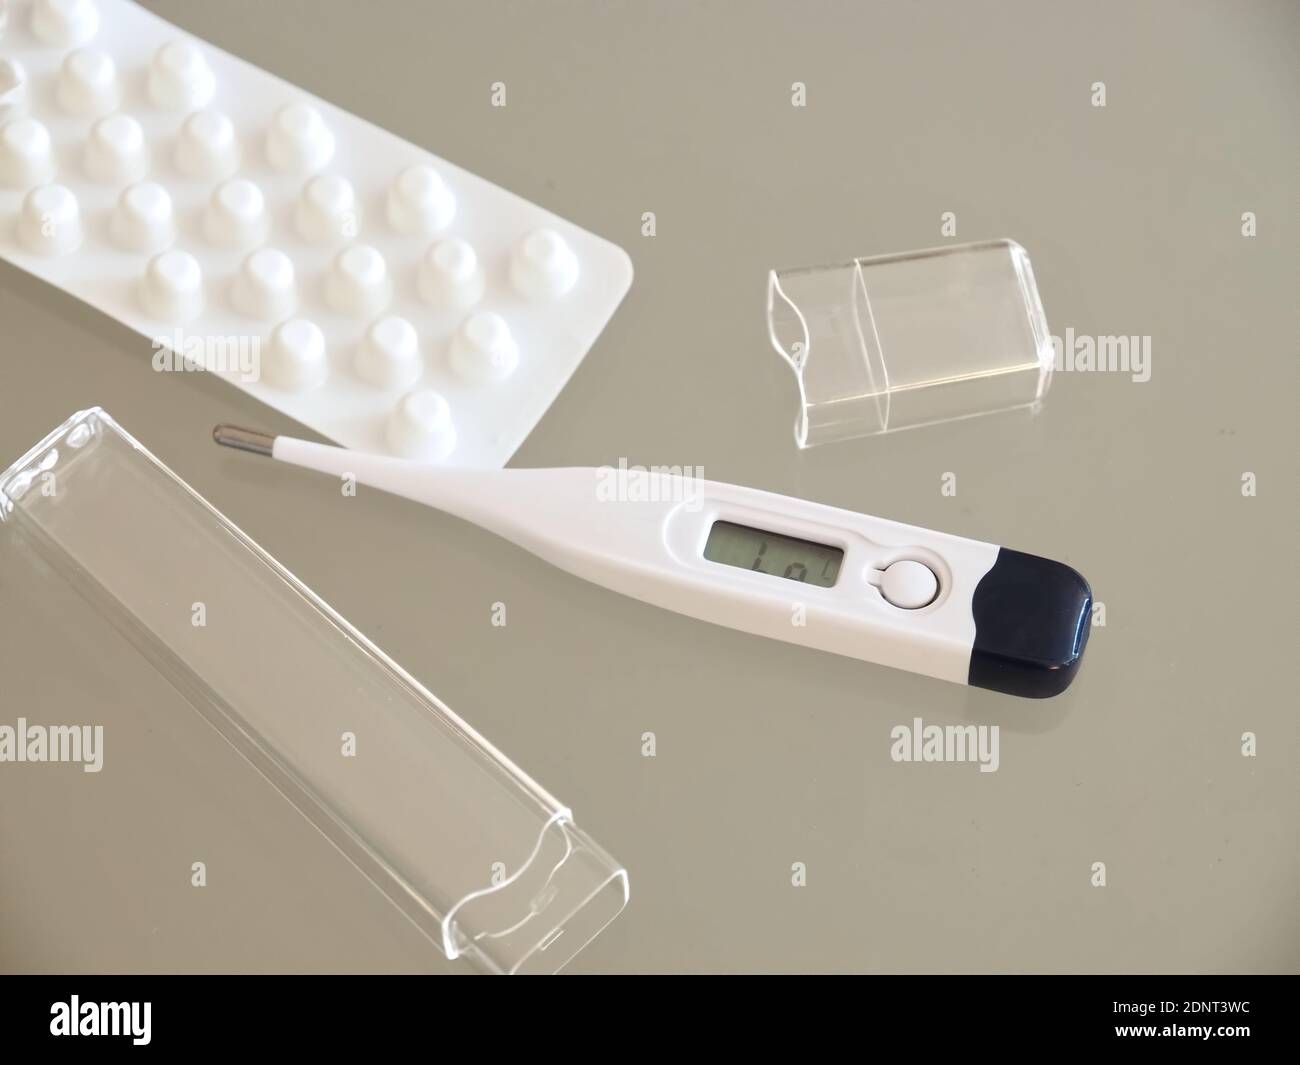 https://c8.alamy.com/comp/2DNT3WC/medical-thermometer-to-measure-fever-on-a-glass-background-2DNT3WC.jpg